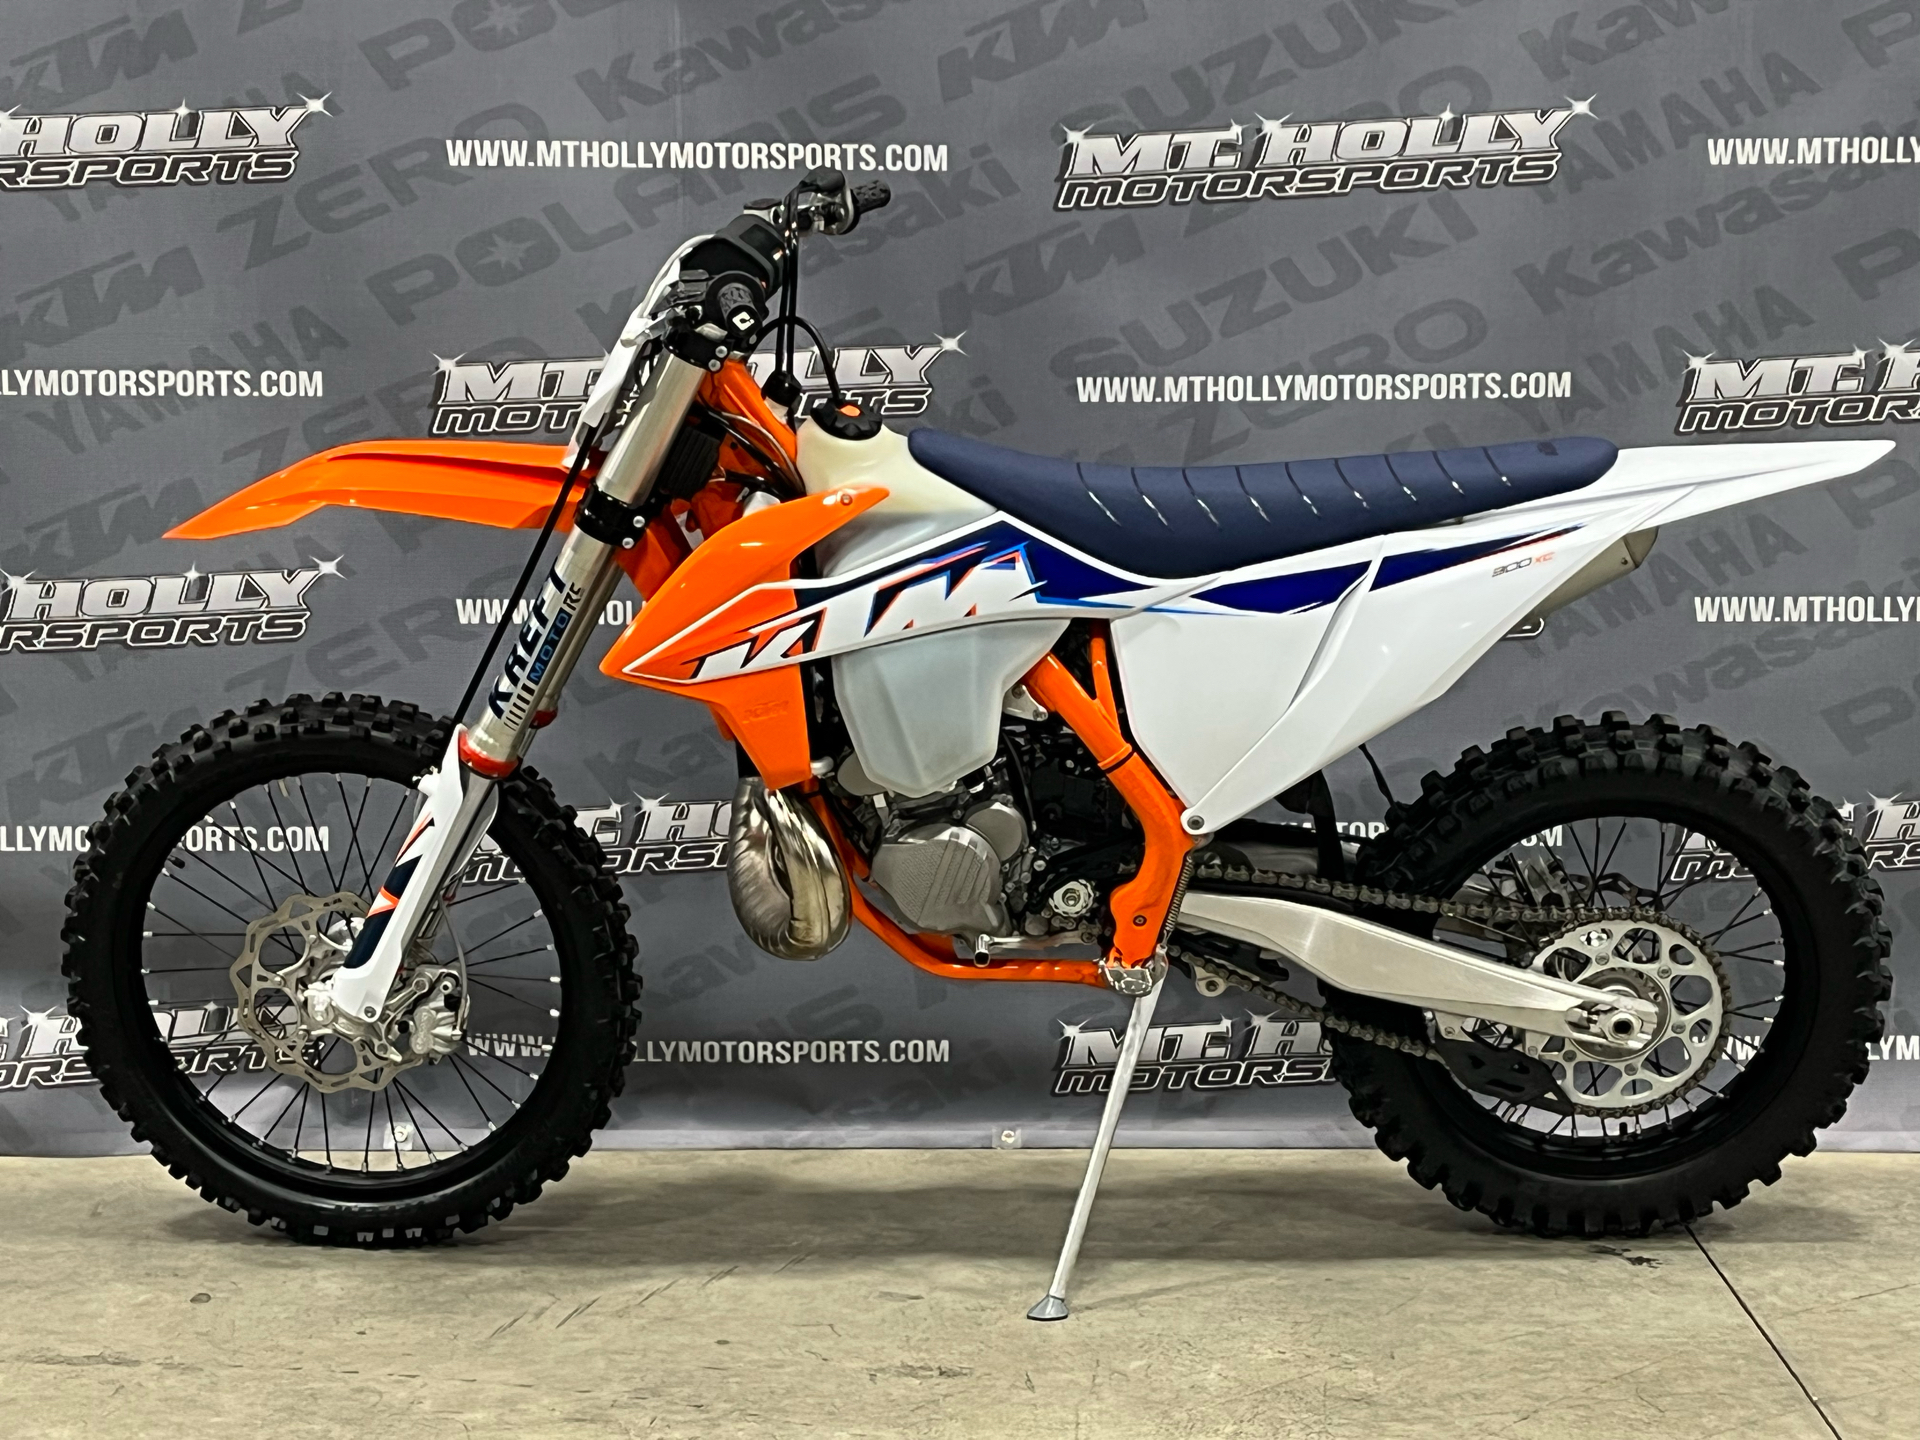 2022 KTM 300 XC TPI in Vincentown, New Jersey - Photo 3